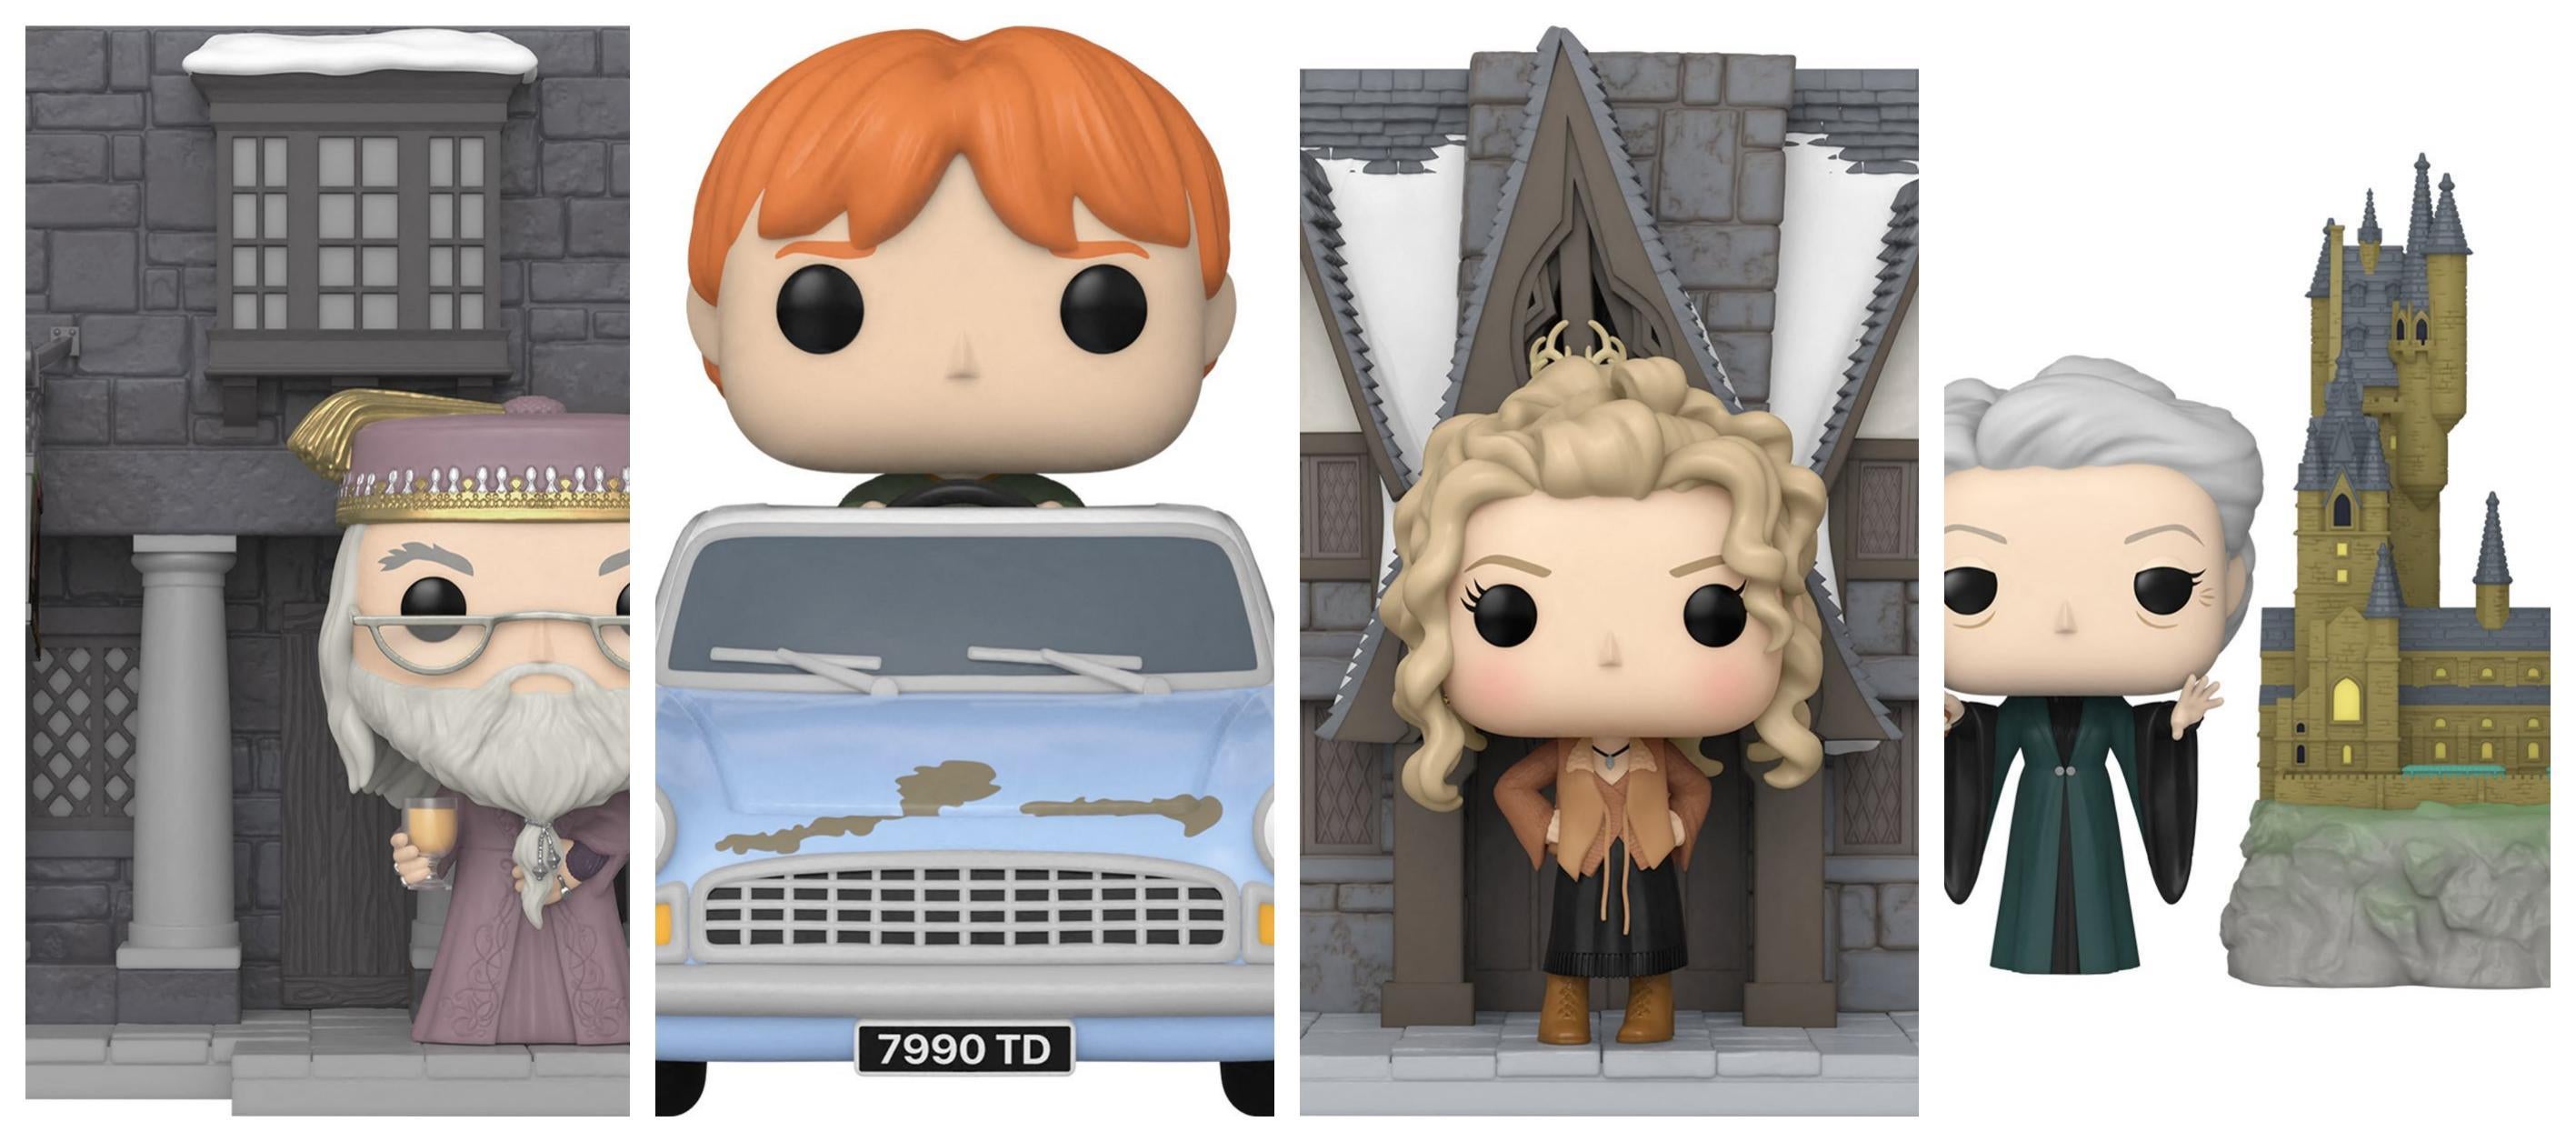 Potter Chamber Secrets Anniversary Funko Pop Wave Is Available Now